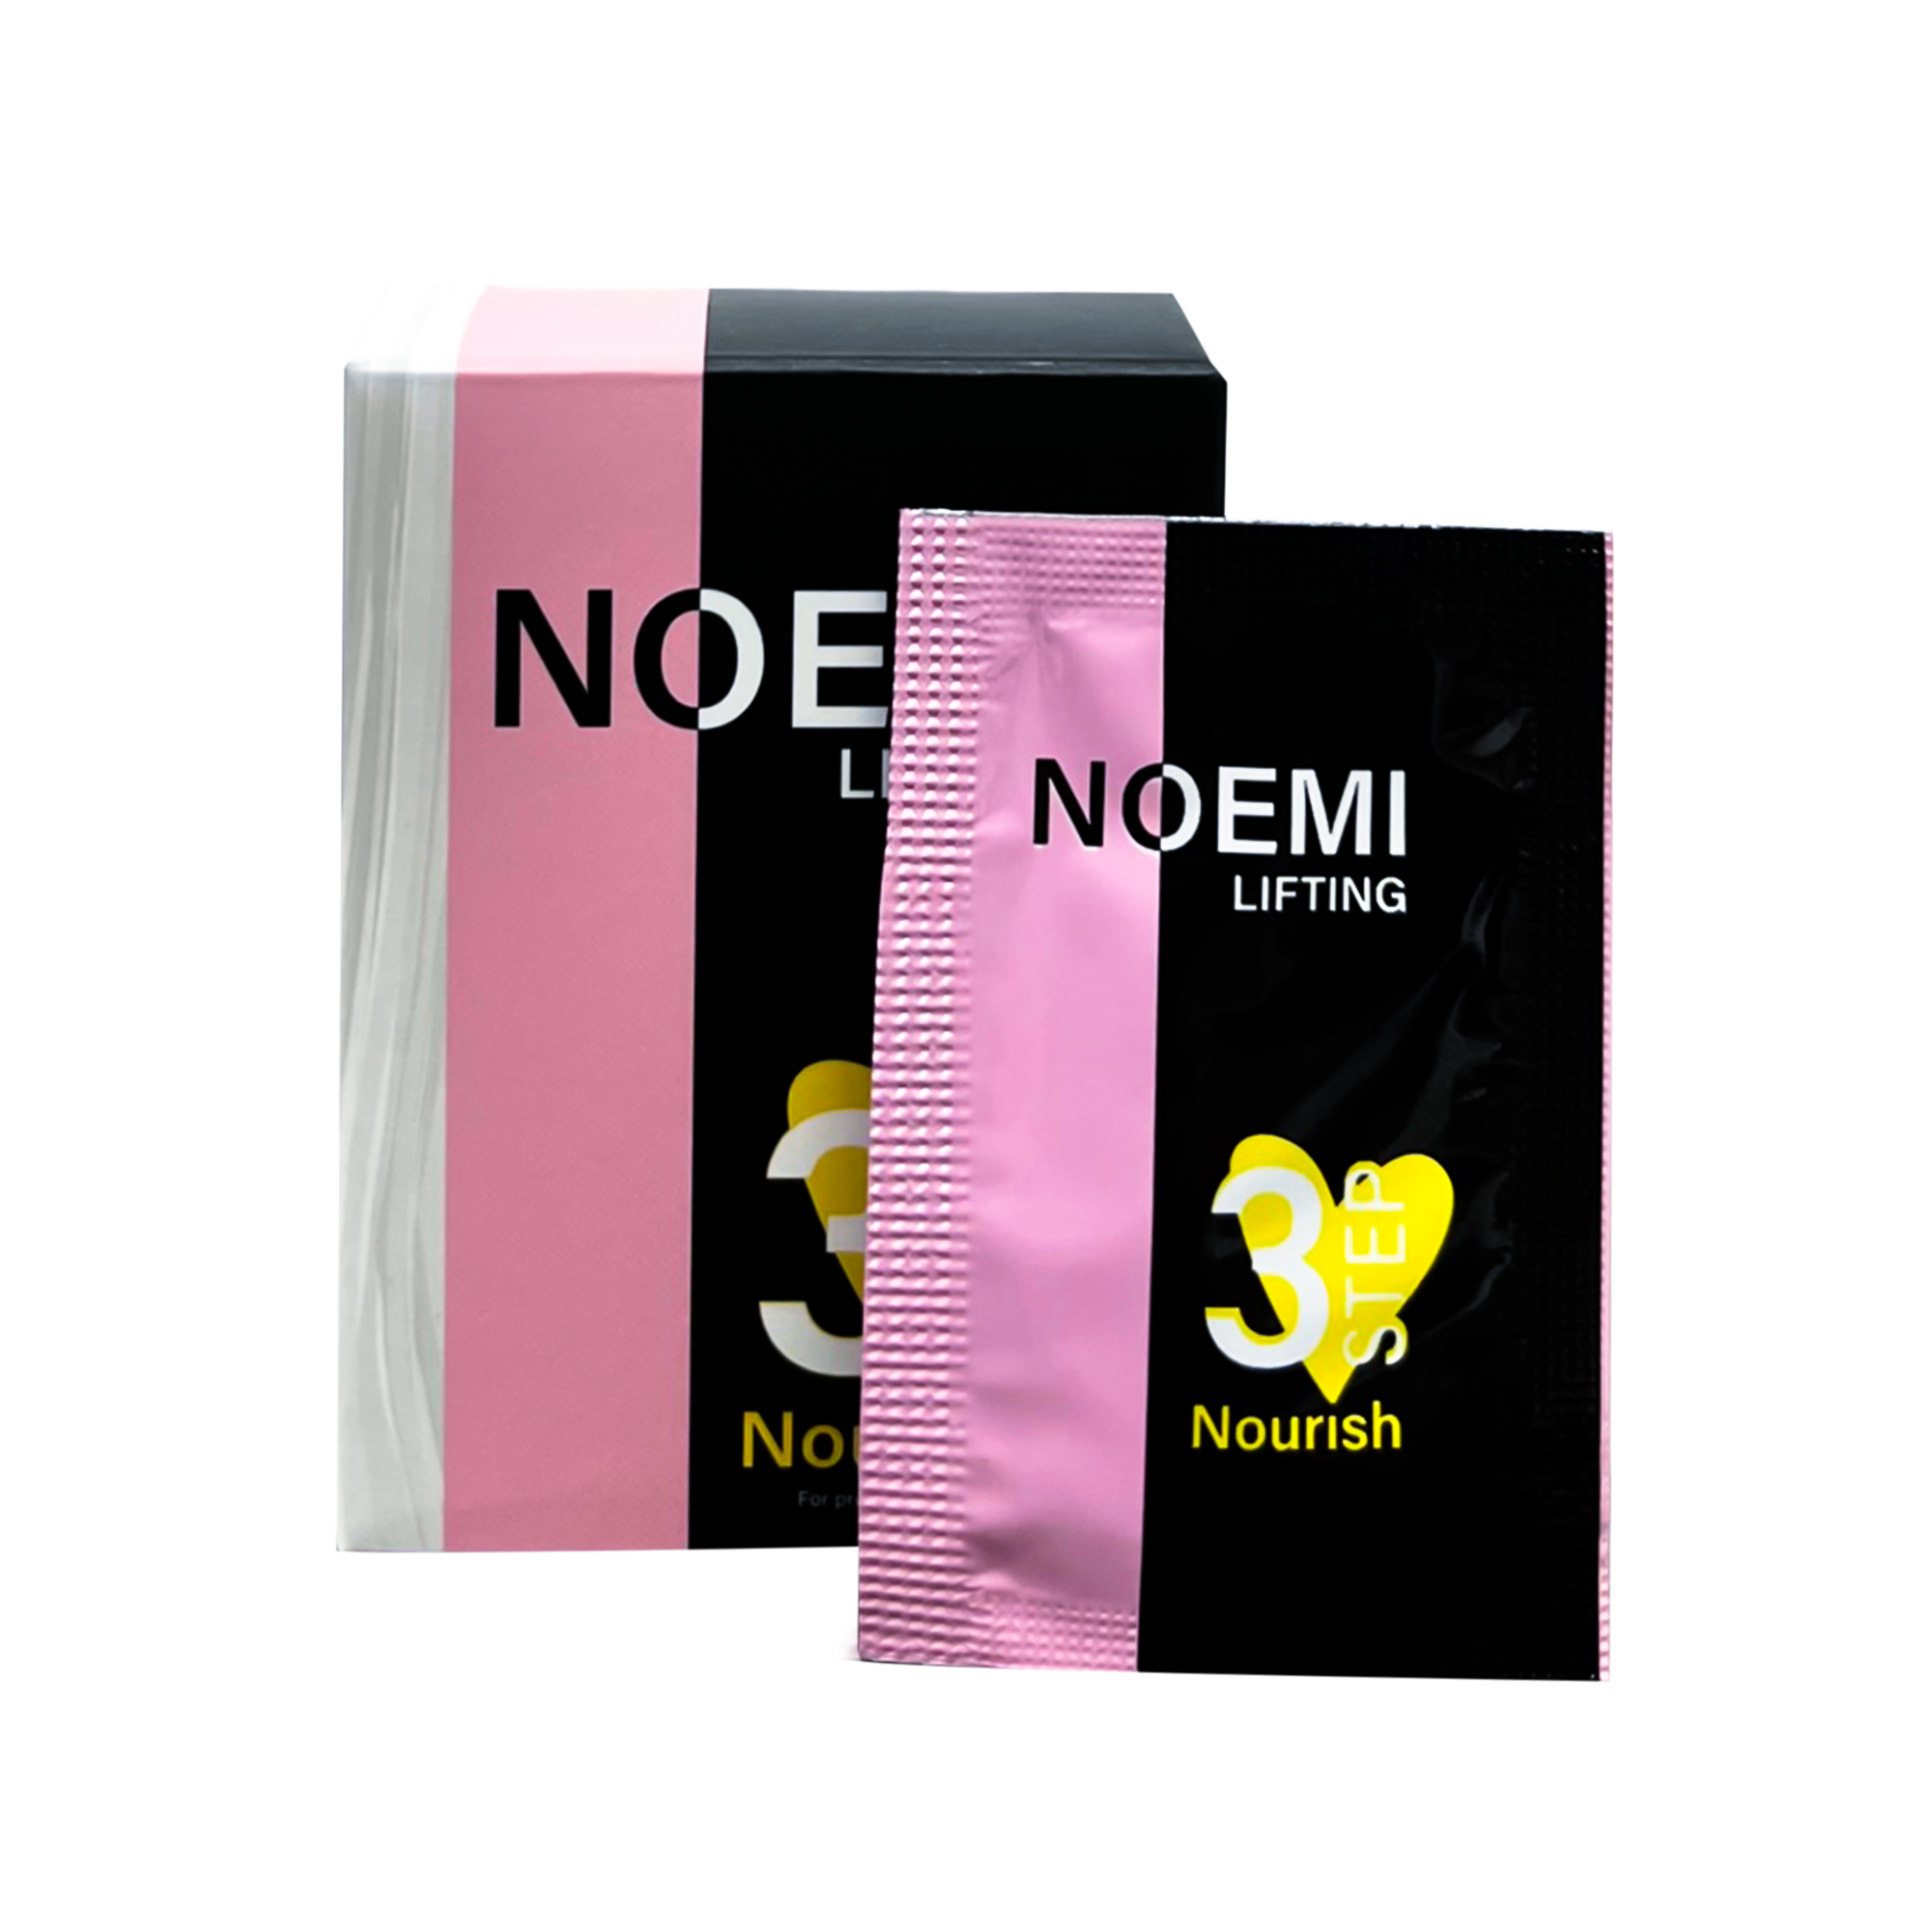 Noemi Lifting - Nourish Lotion Step 3 - Content: (10 Sachets with 1m)